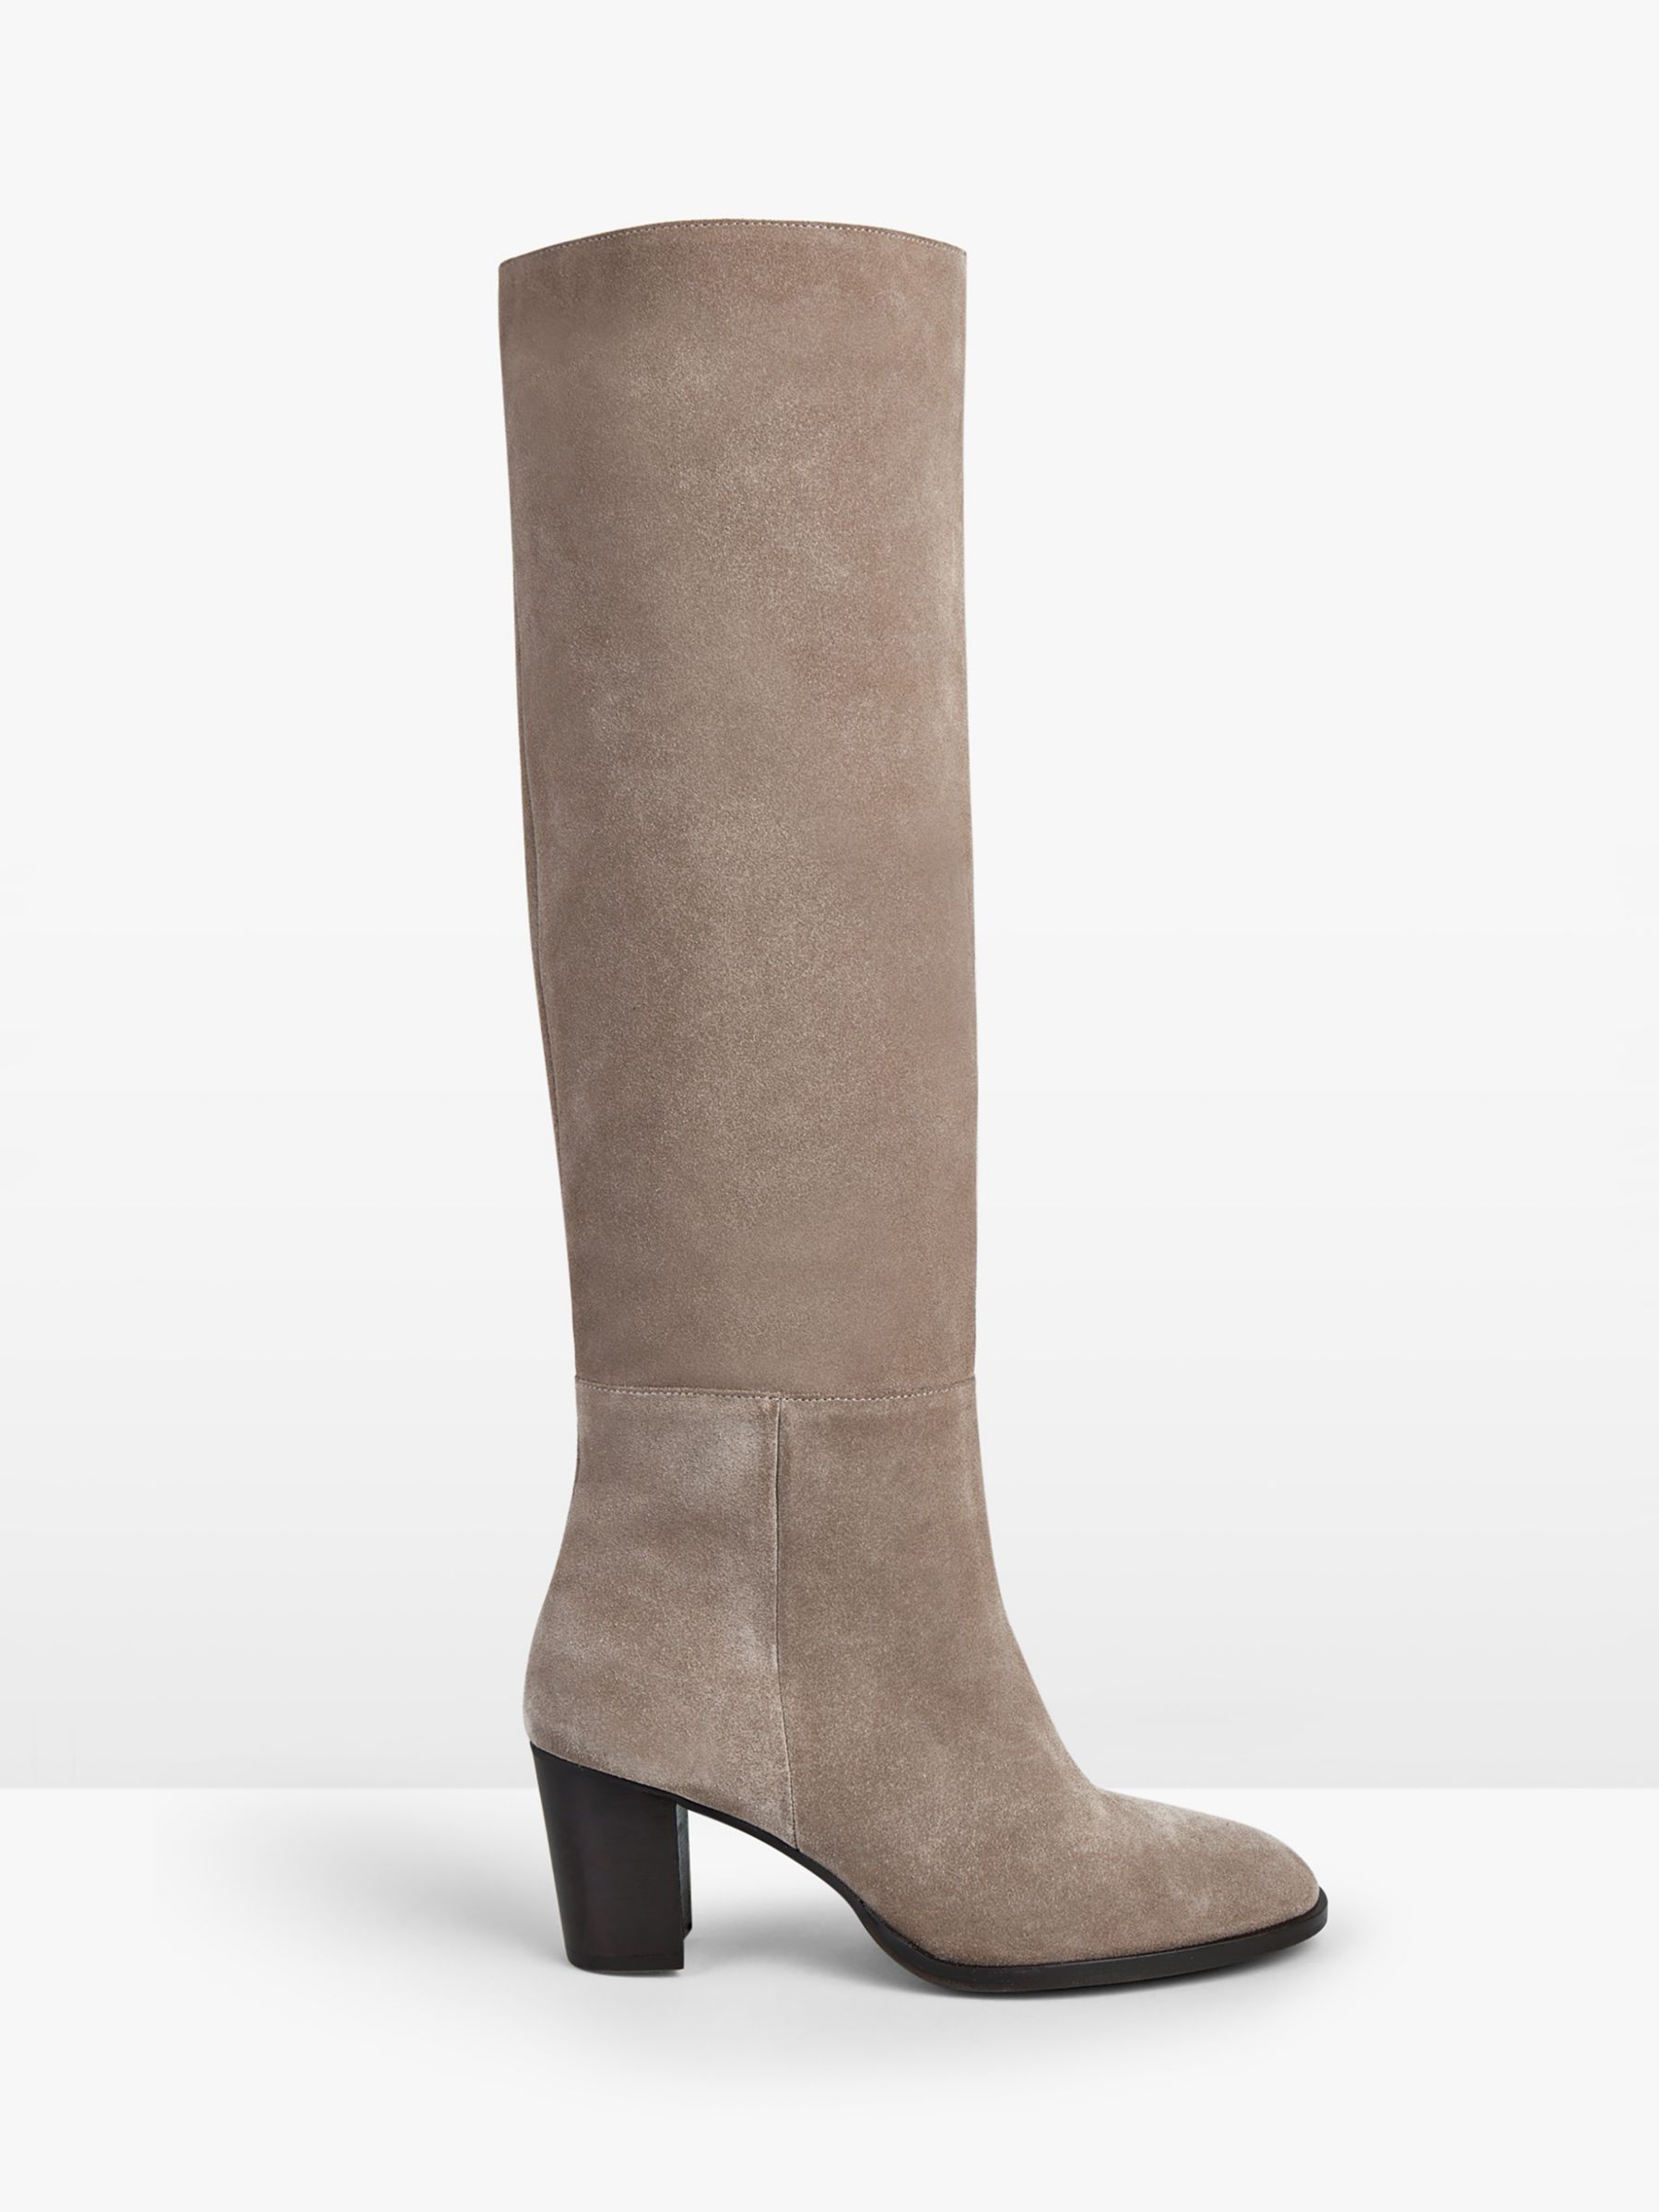 hush Draper Suede Long Boots, Taupe at John Lewis & Partners